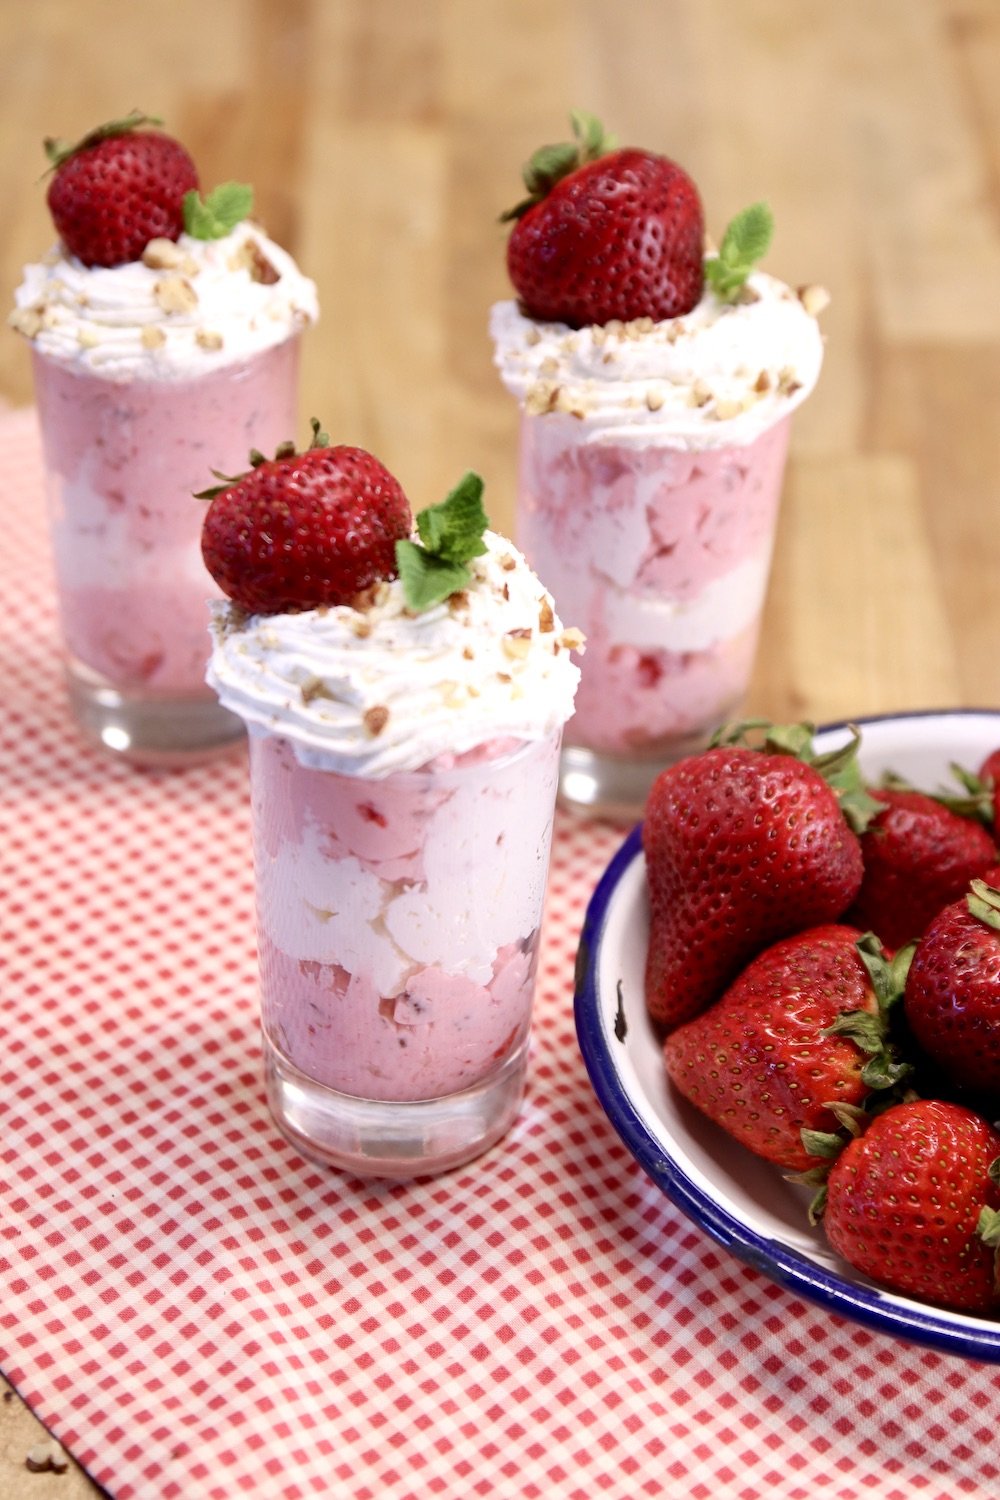 3 dessert glasses with strawberry fluff dessert - topped with cool whip and a strawberry